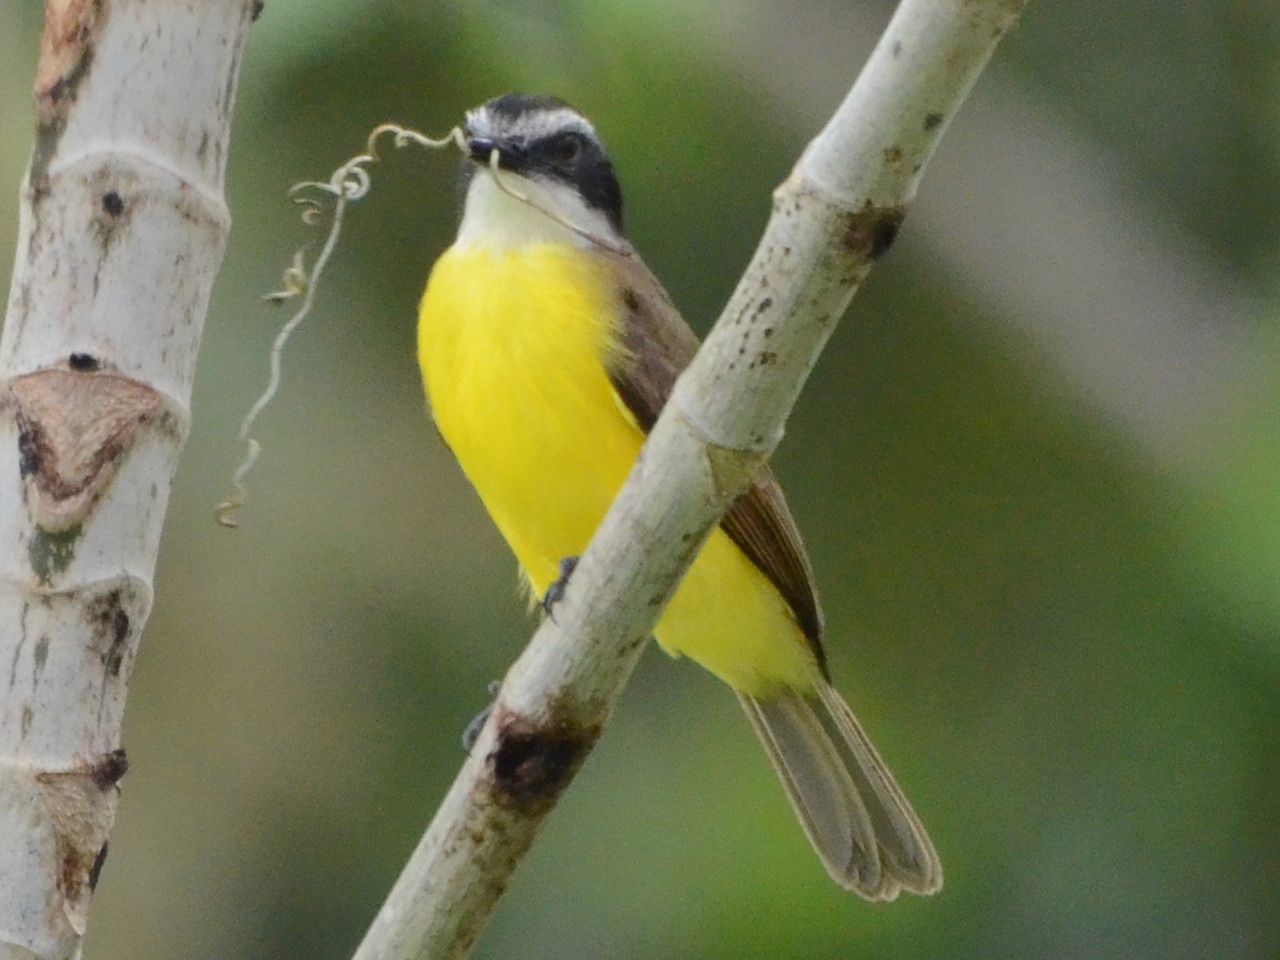 Click picture to see more Lesser Kiskadees.